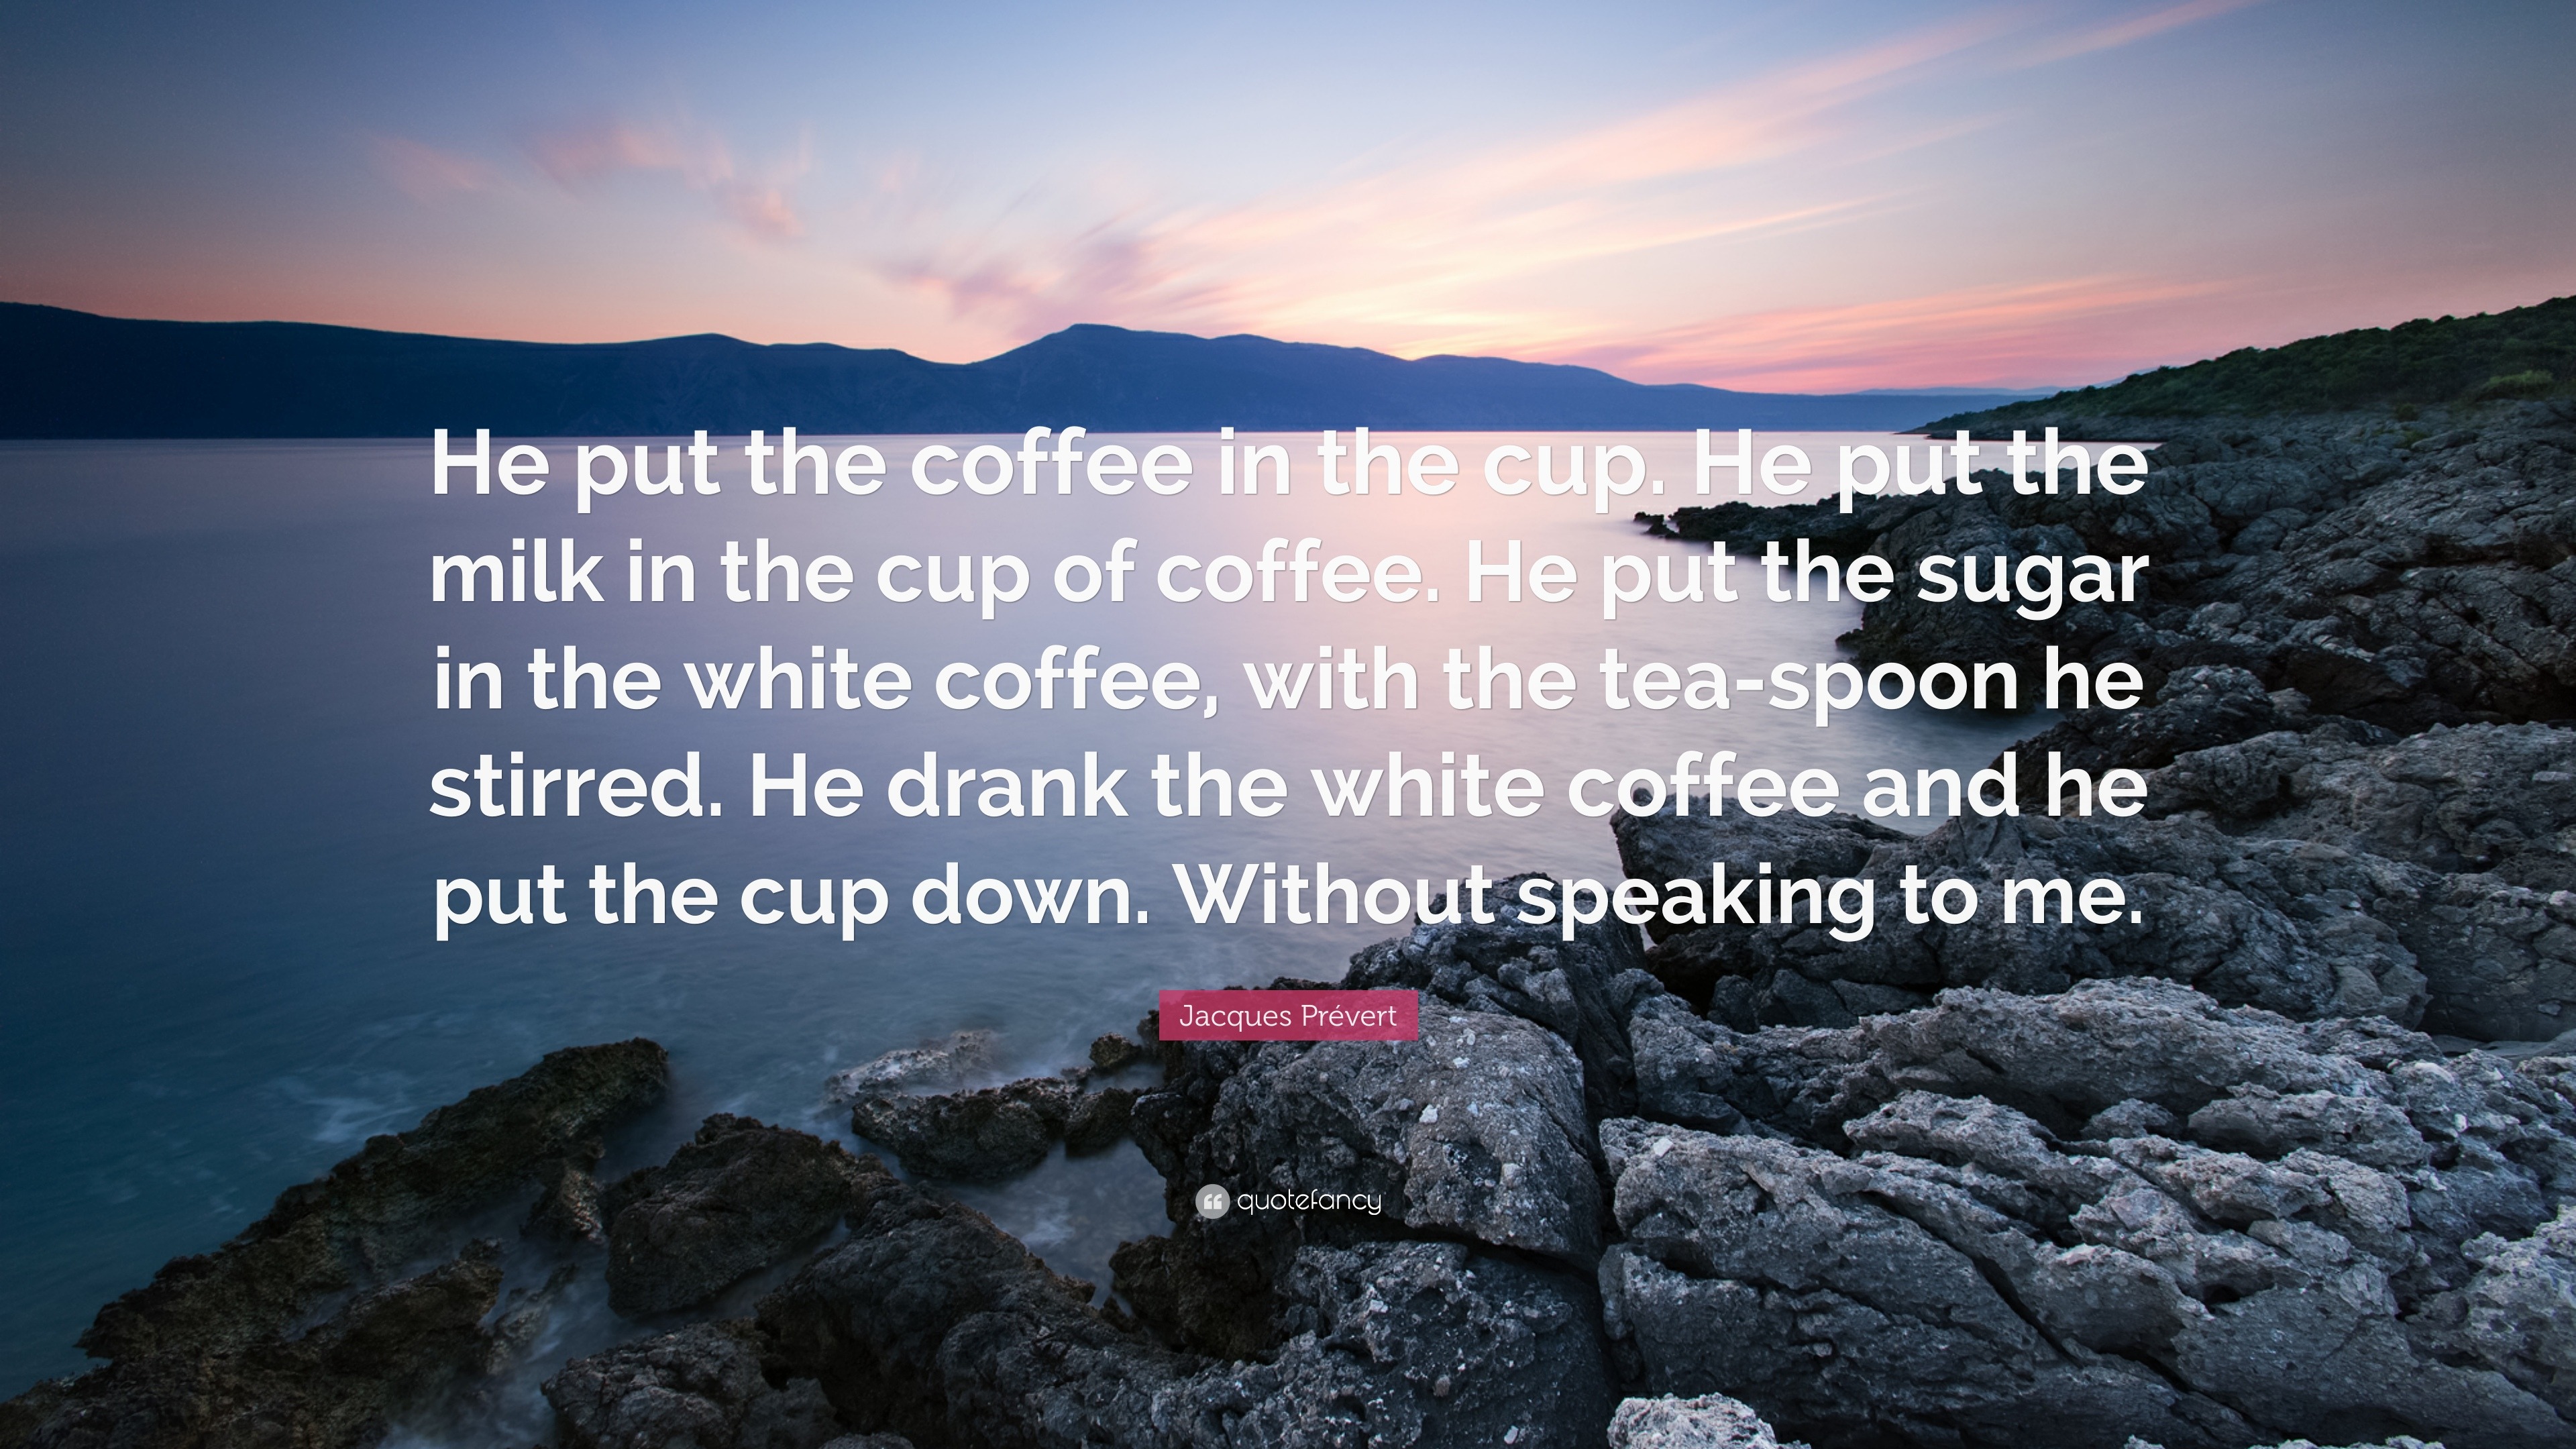 Jacques Prevert Quote He Put The Coffee In The Cup He Put The Milk In The Cup Of Coffee He Put The Sugar In The White Coffee With The Tea S